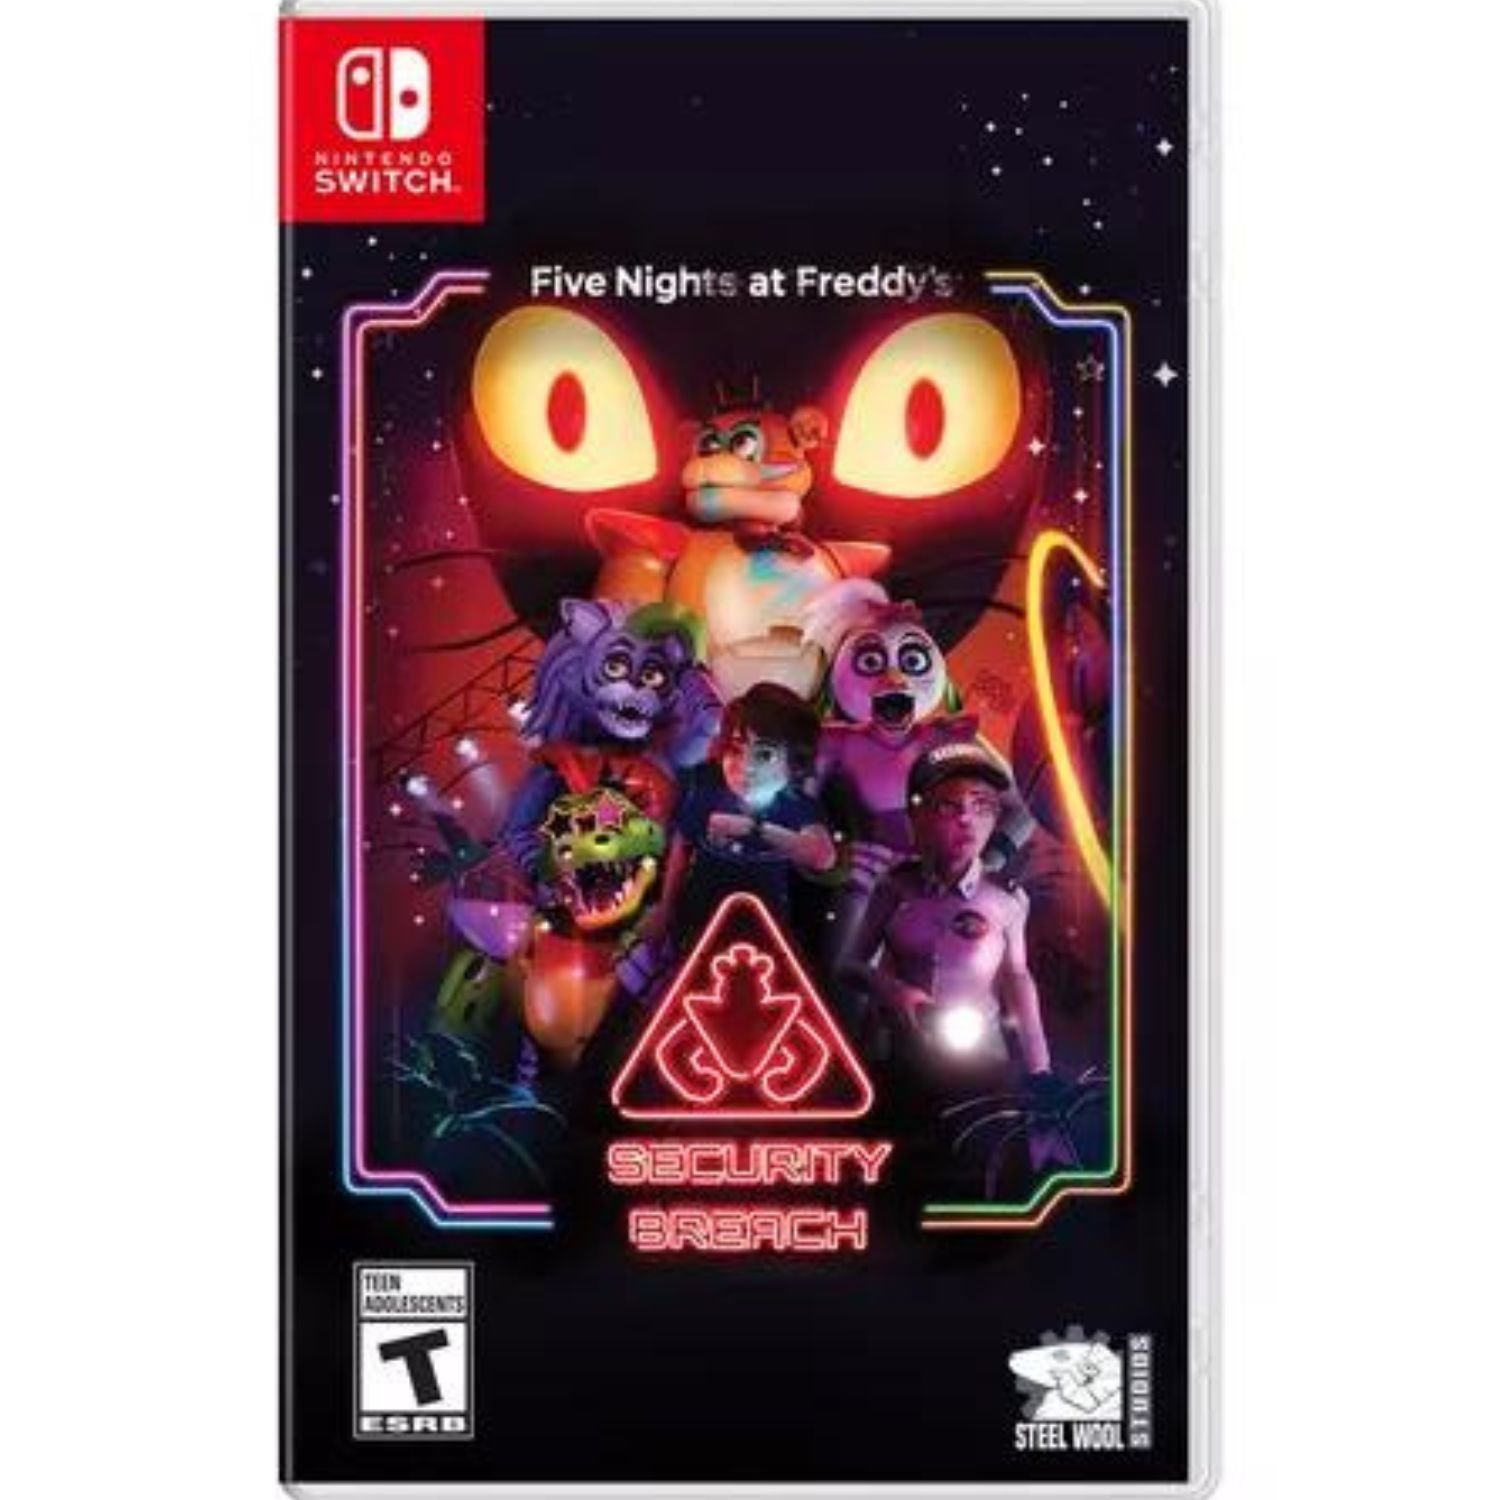 Five Nights at Freddy’s: Security Breach – Nintendo Switch